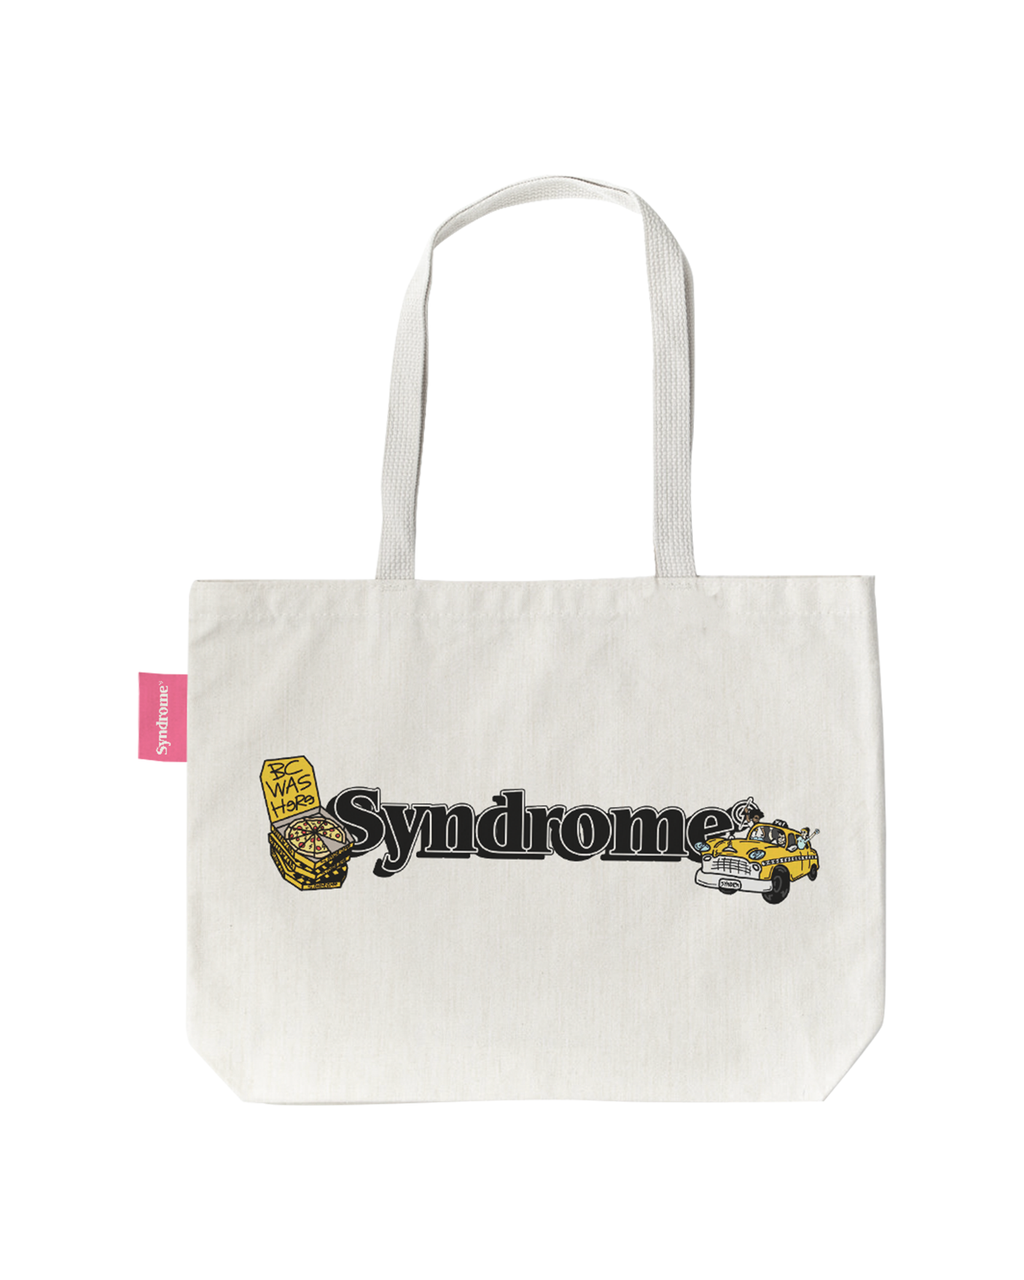 Yellow Cab x Syndrome Tote Bag